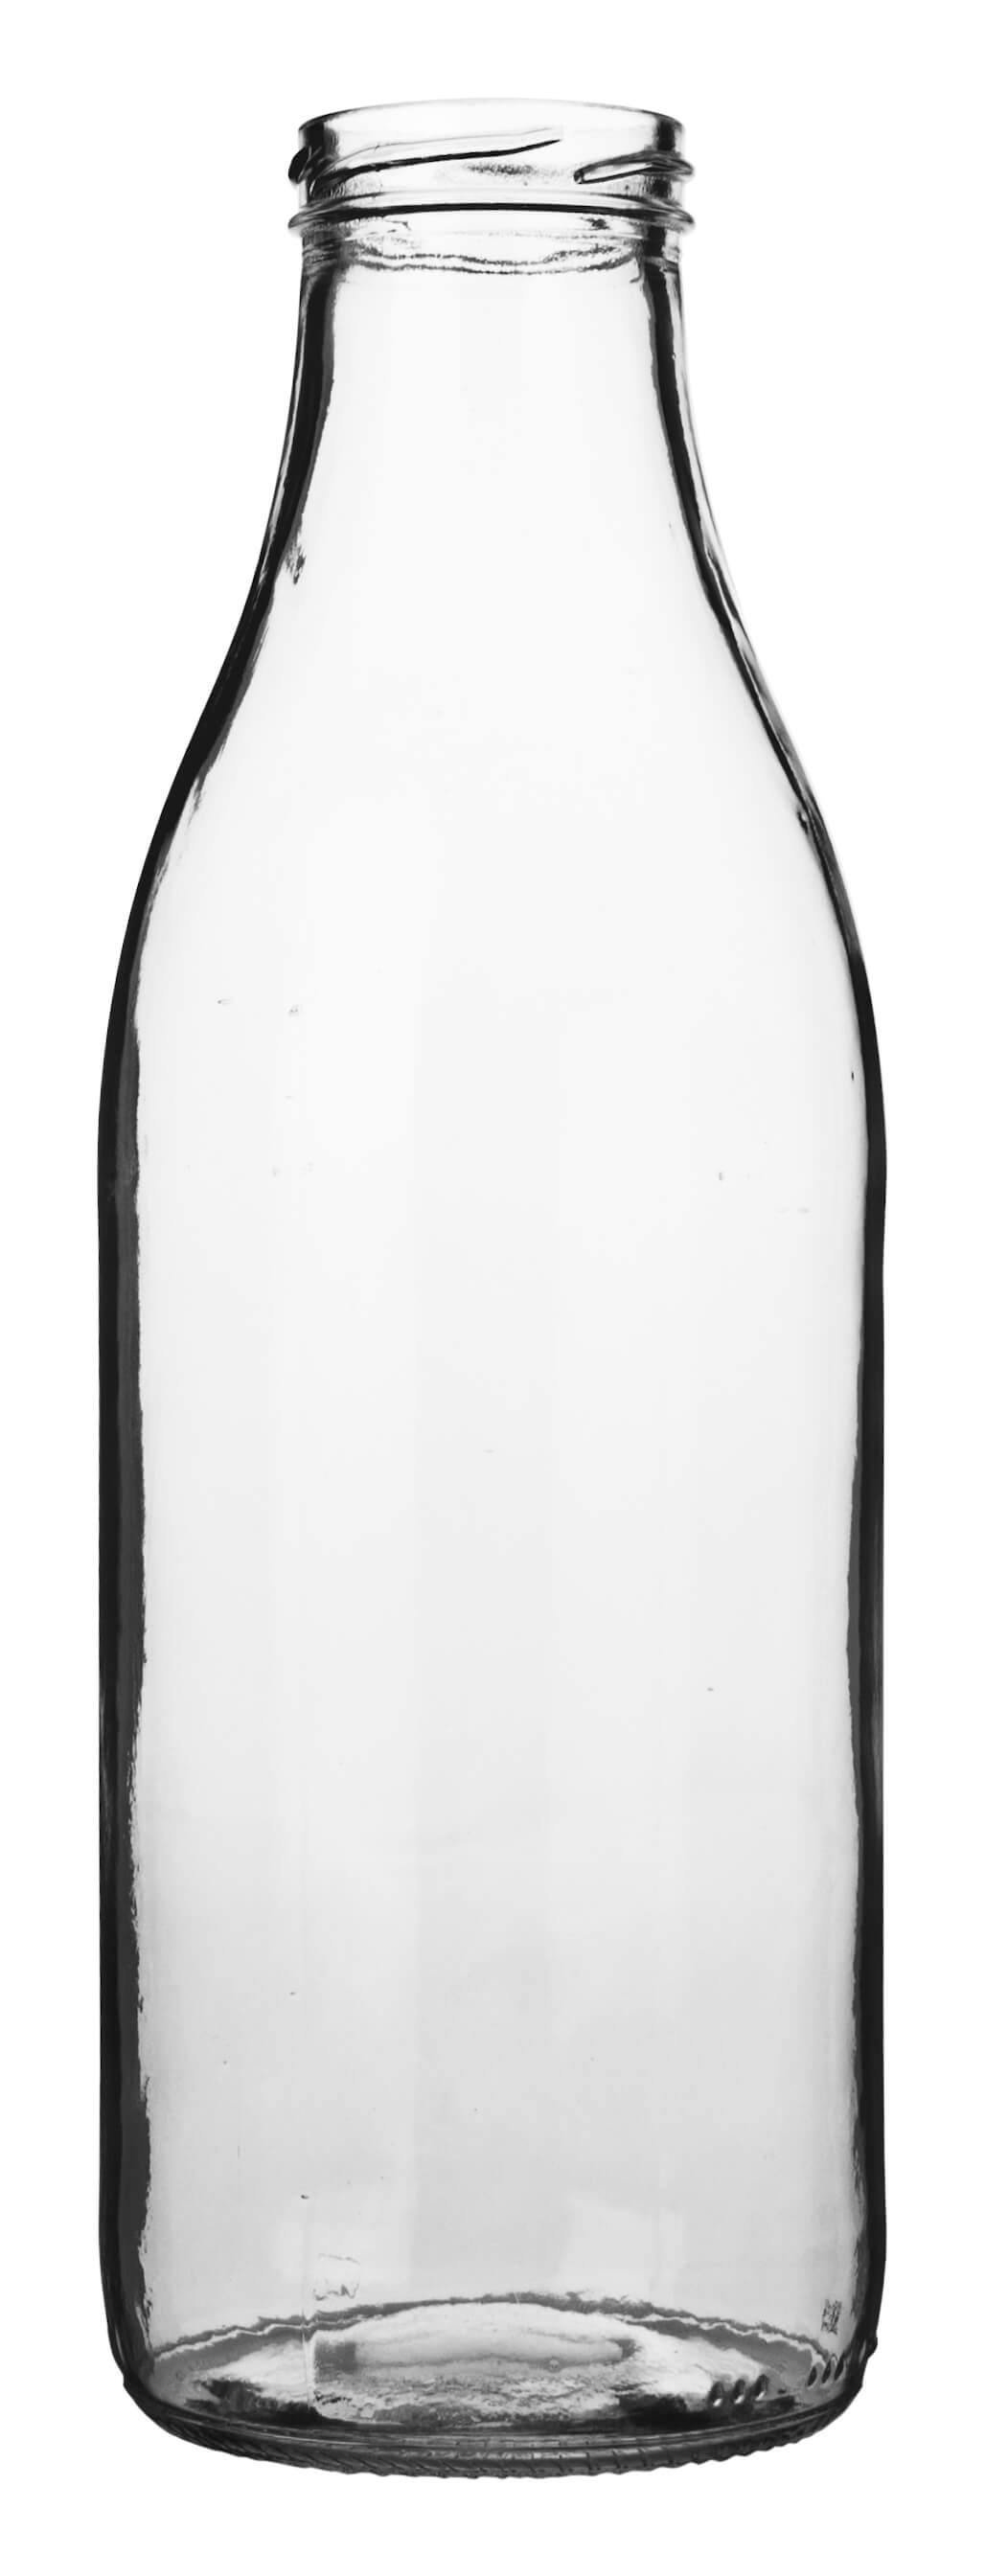 Glass bottle - wide mouth clear 1000ml